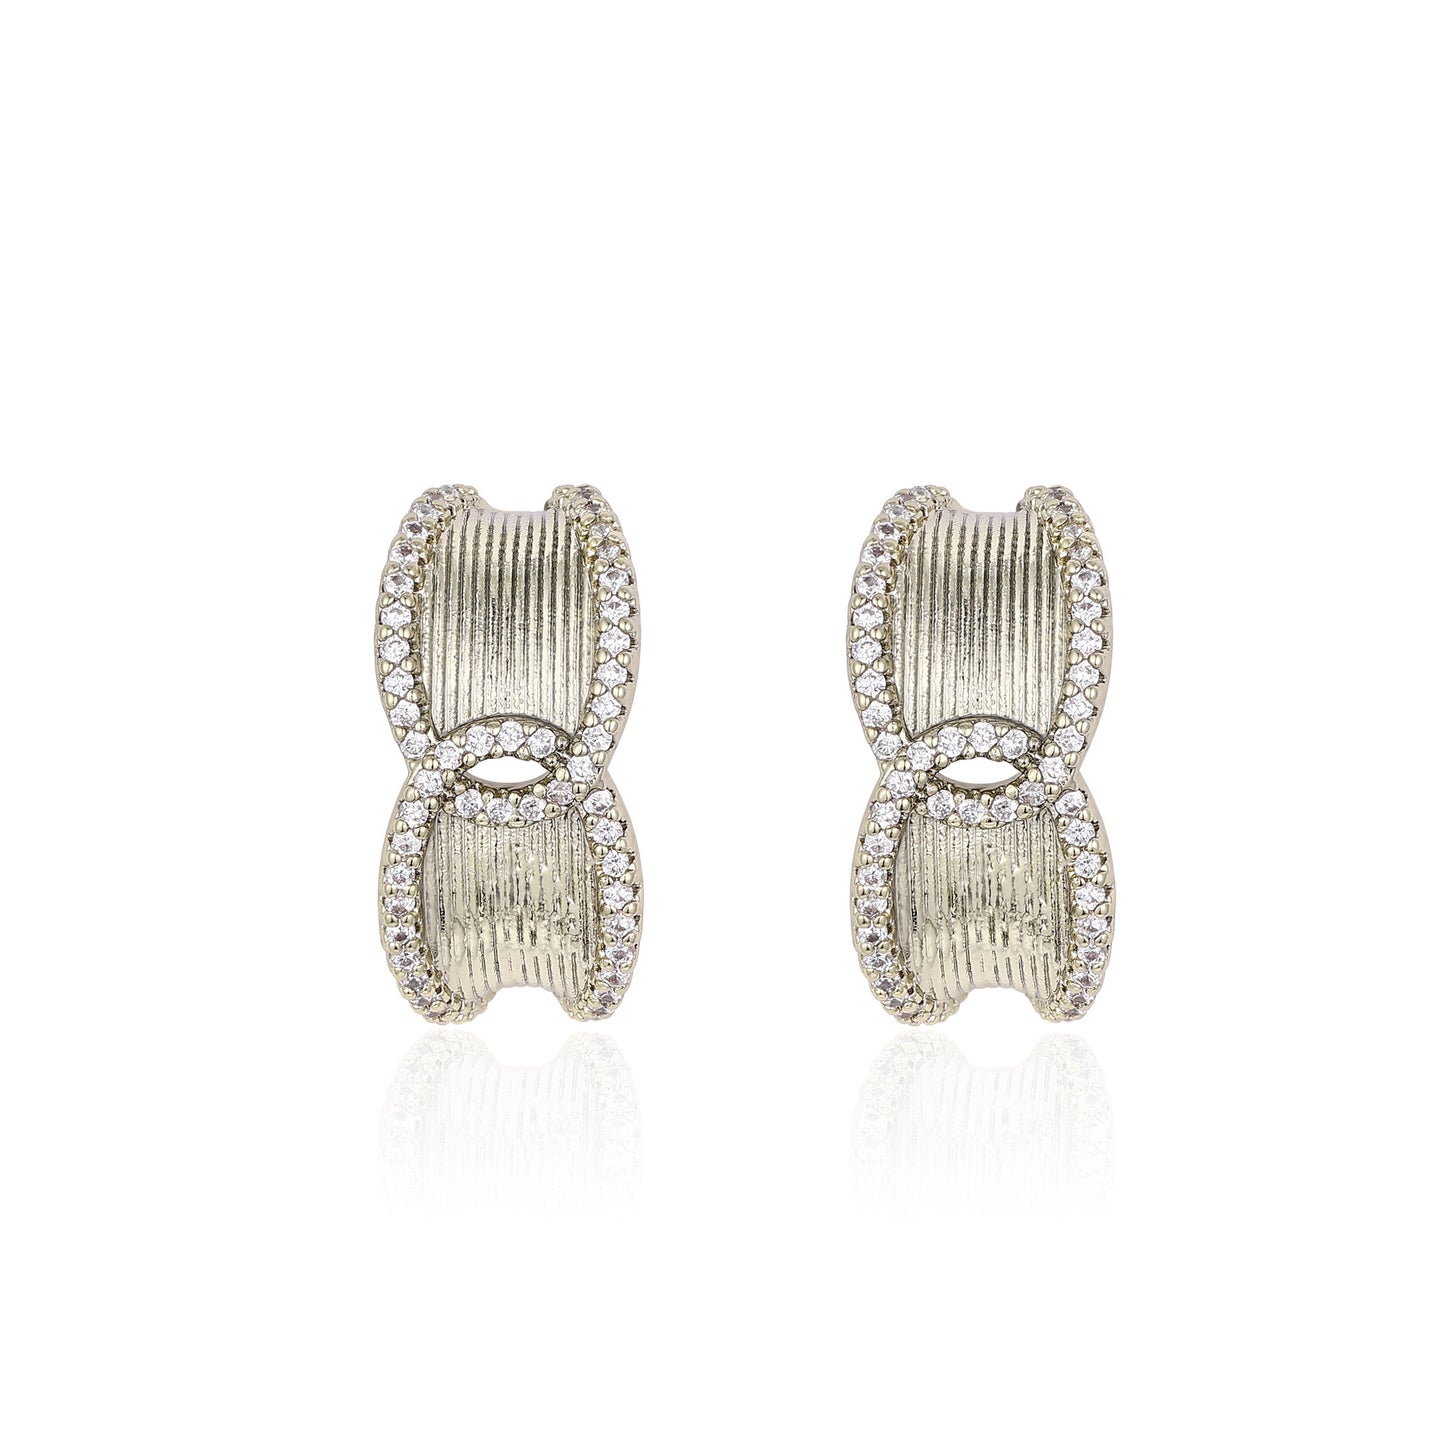 French designer Italian style collection French vintage textured geometric earrings delicate zircon earrings